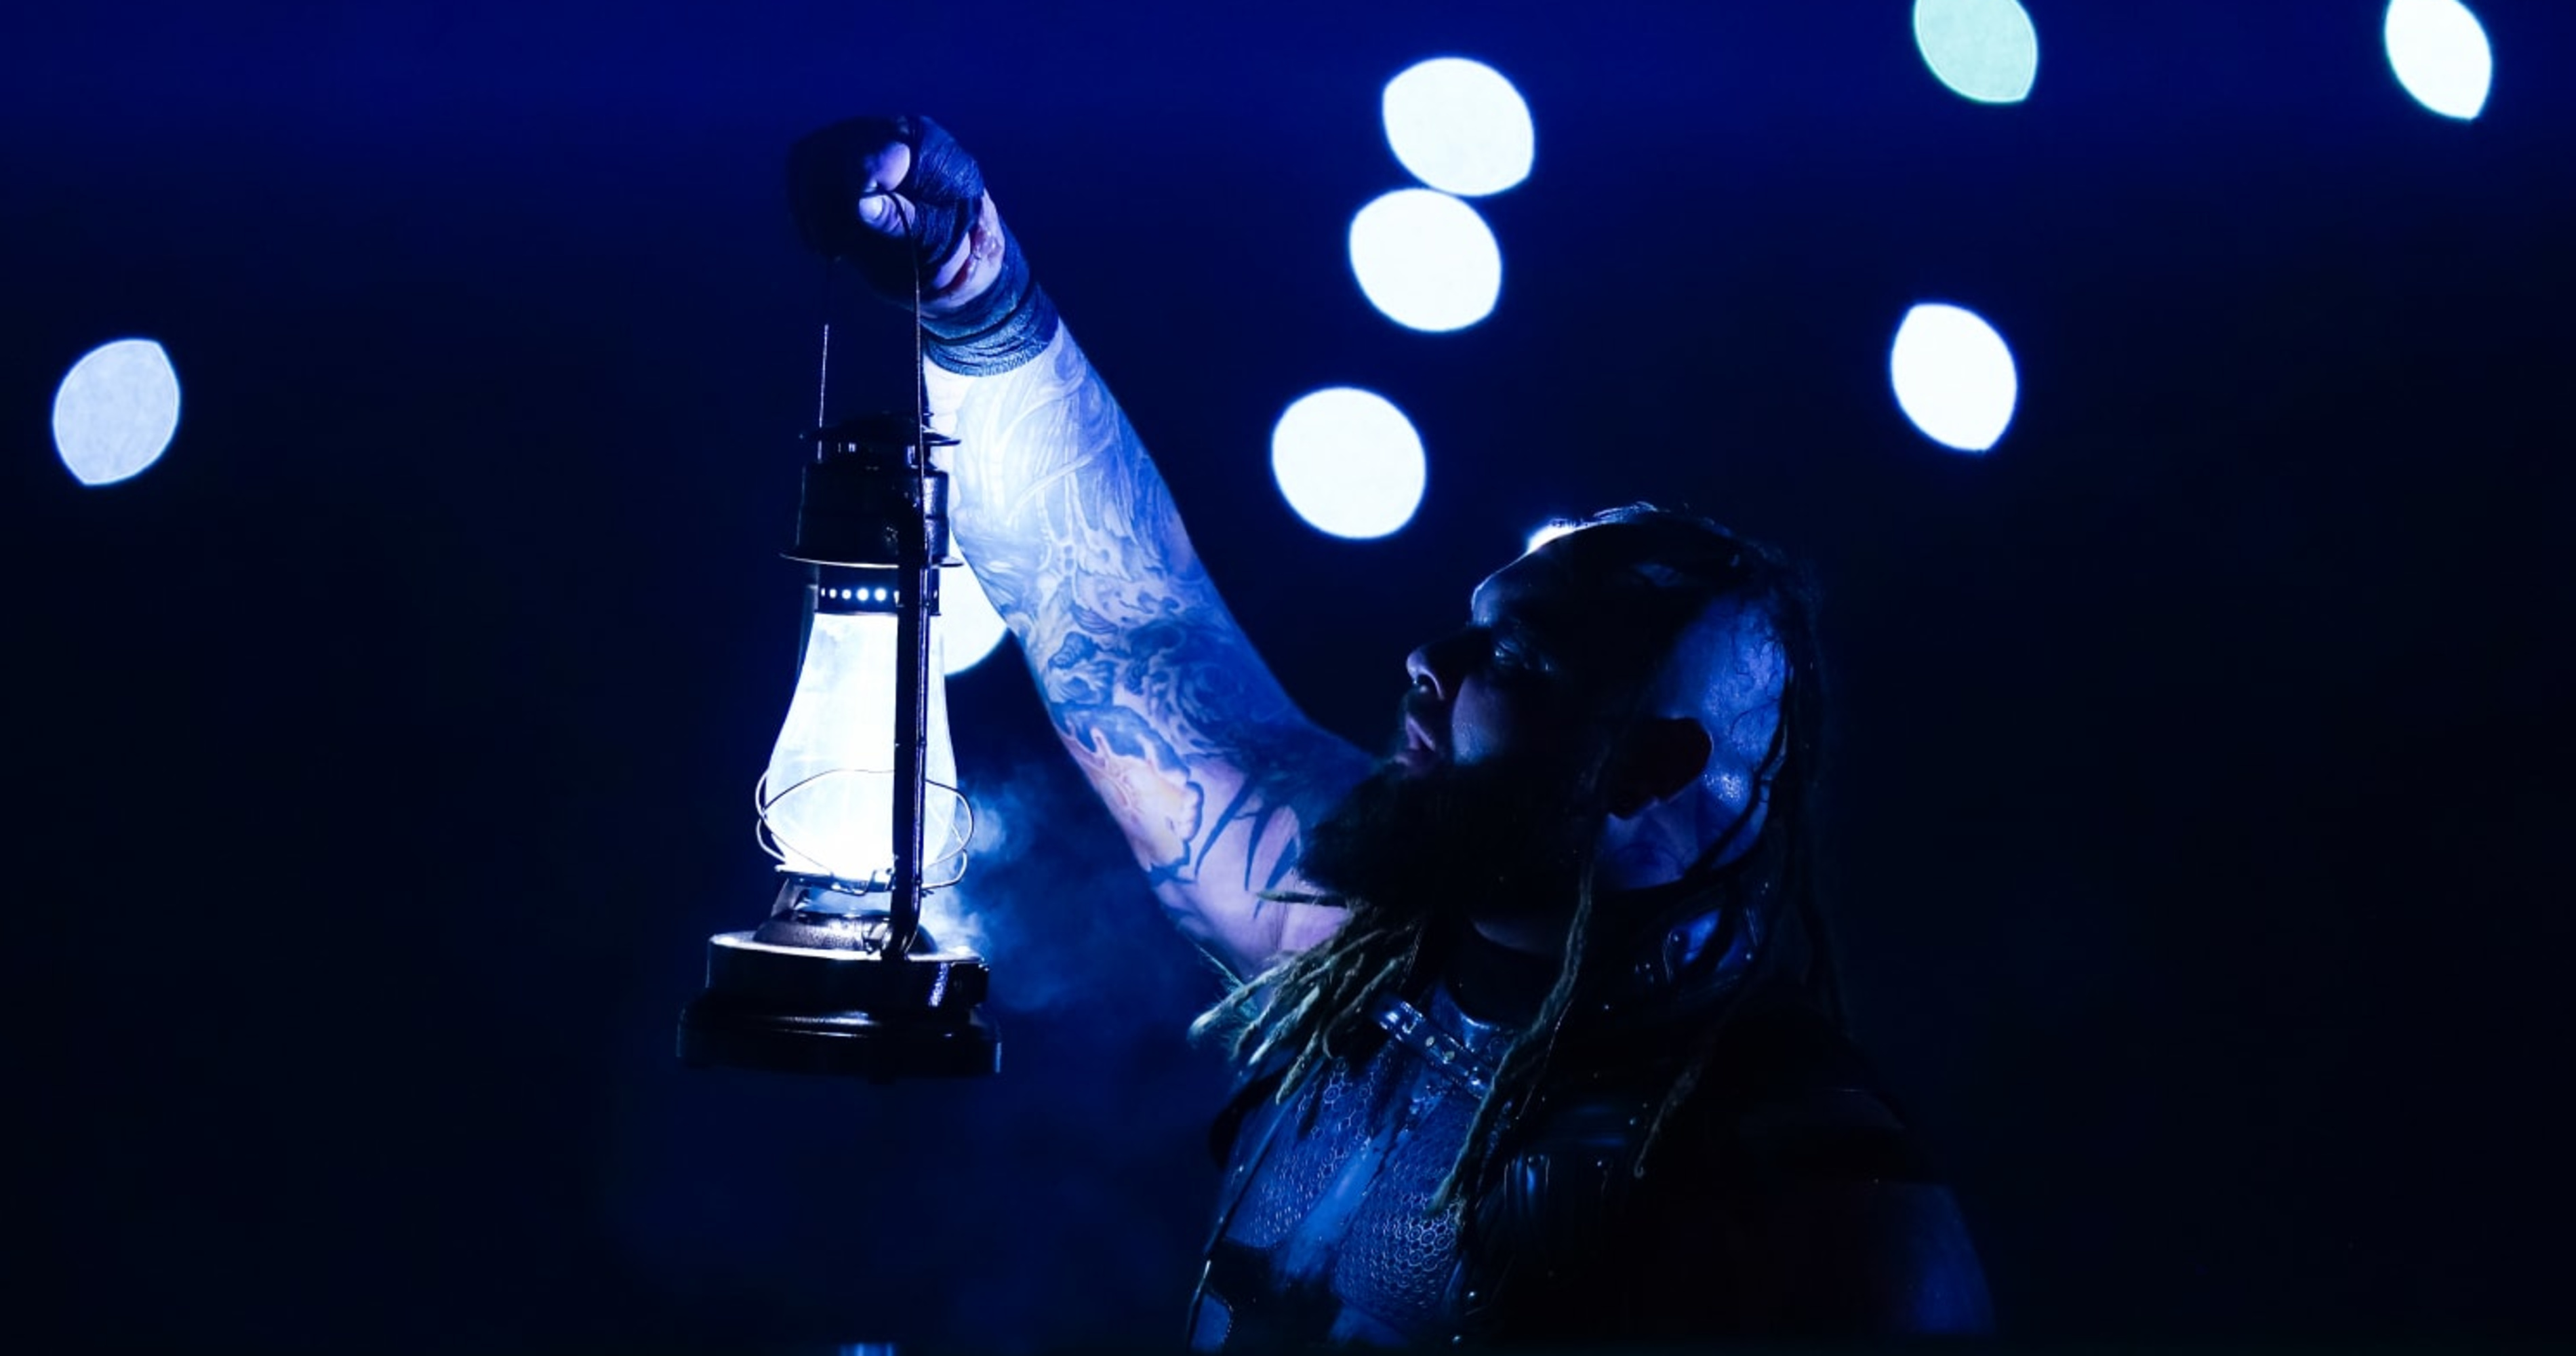 Bray Wyatt was reportedly already dealing with heart issues around